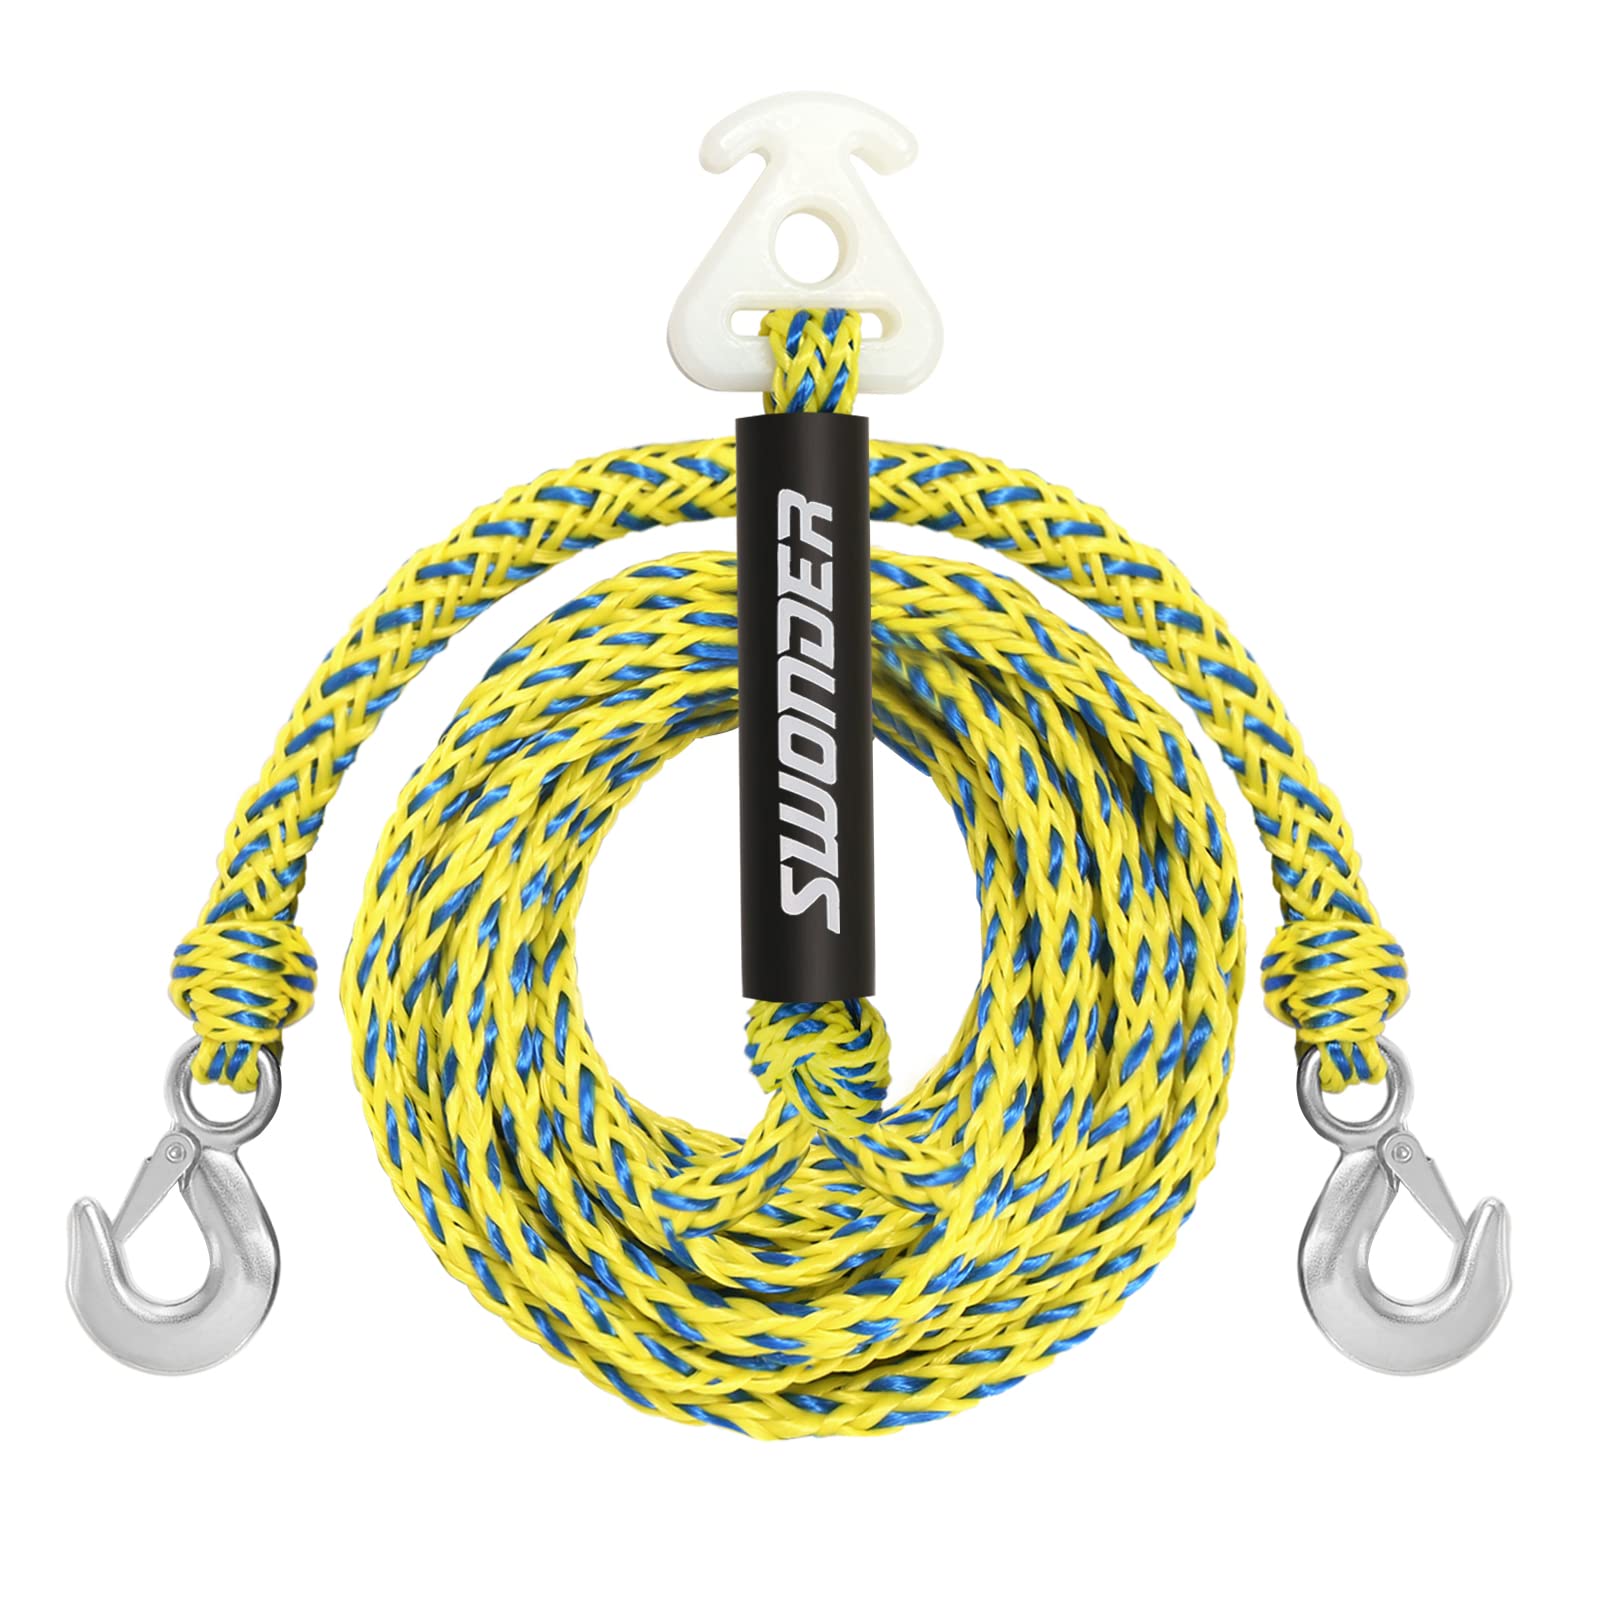 Swonder Boat Tow Harness for Tubing, 16ft Boat Tow Rope for Tubing Ski Tow  Bridle for